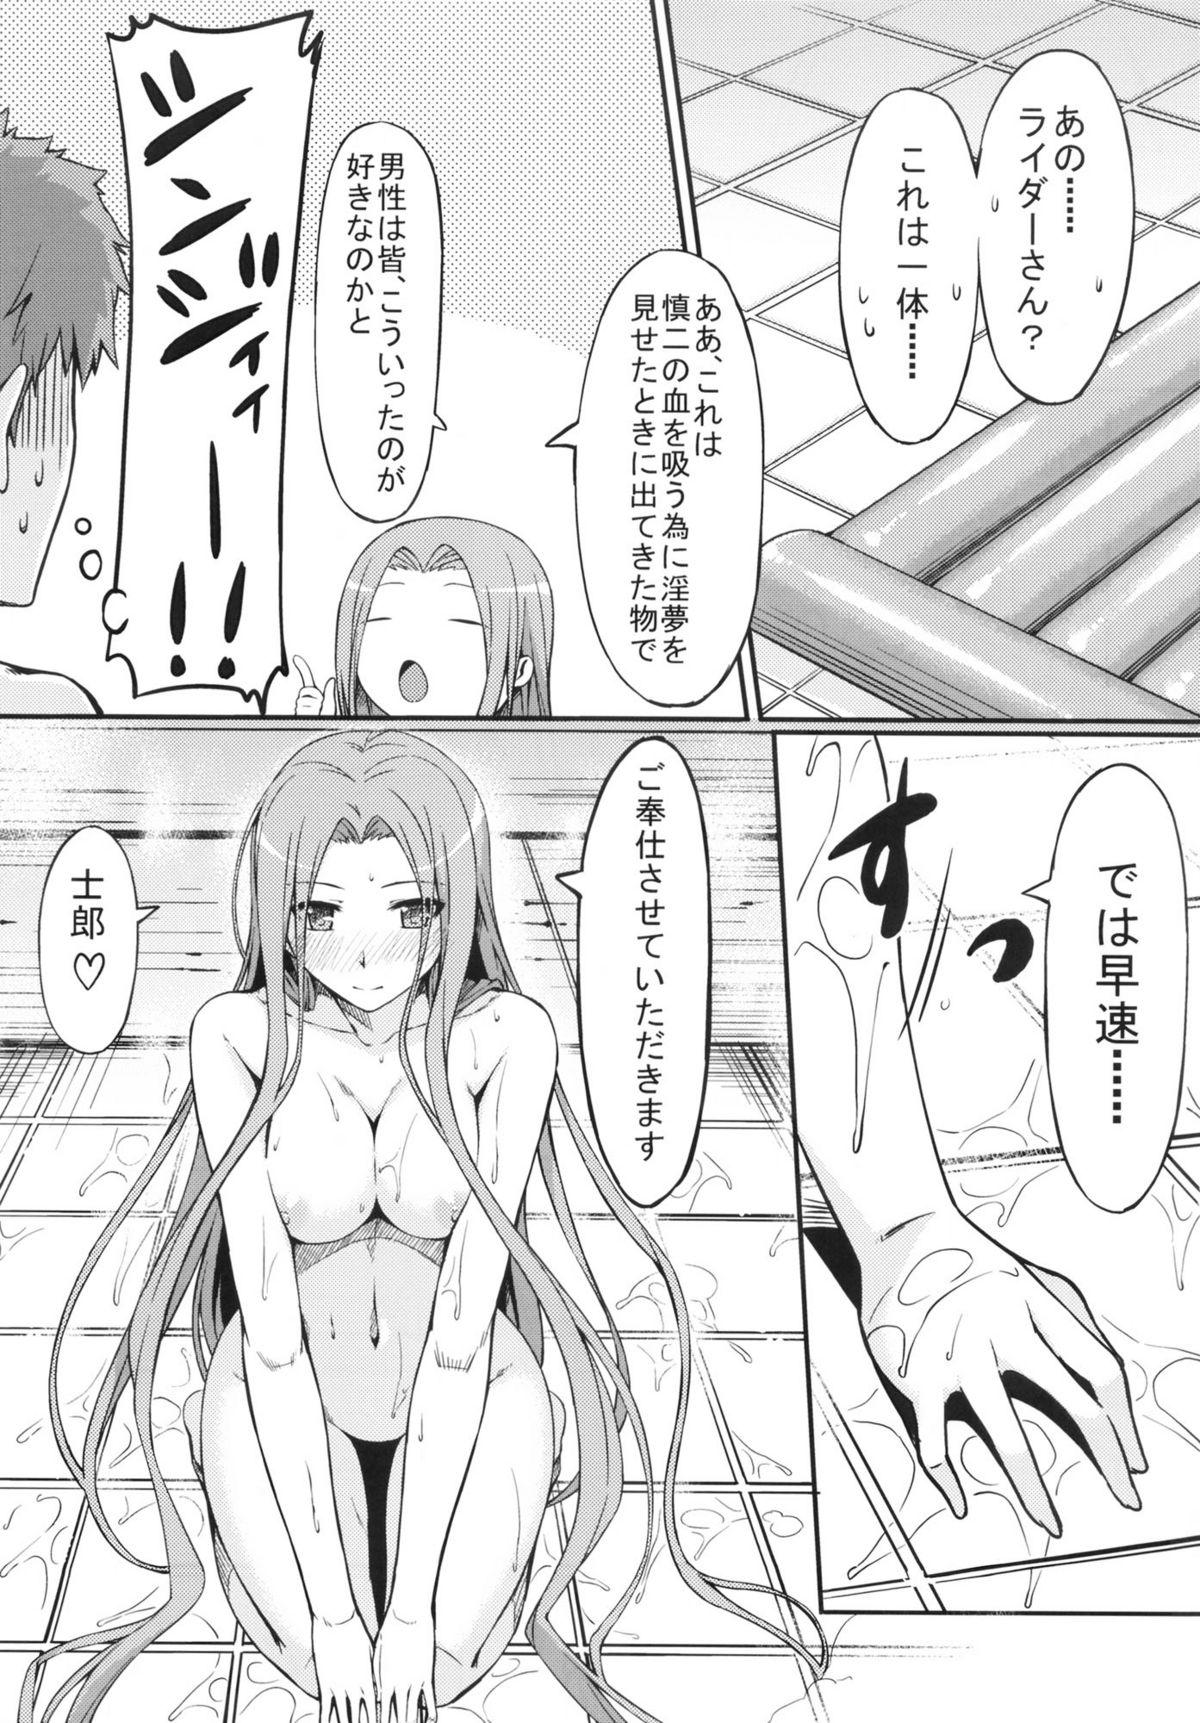 Vadia Rider san to Ofuro. - Fate stay night Fate hollow ataraxia Shaven - Page 6